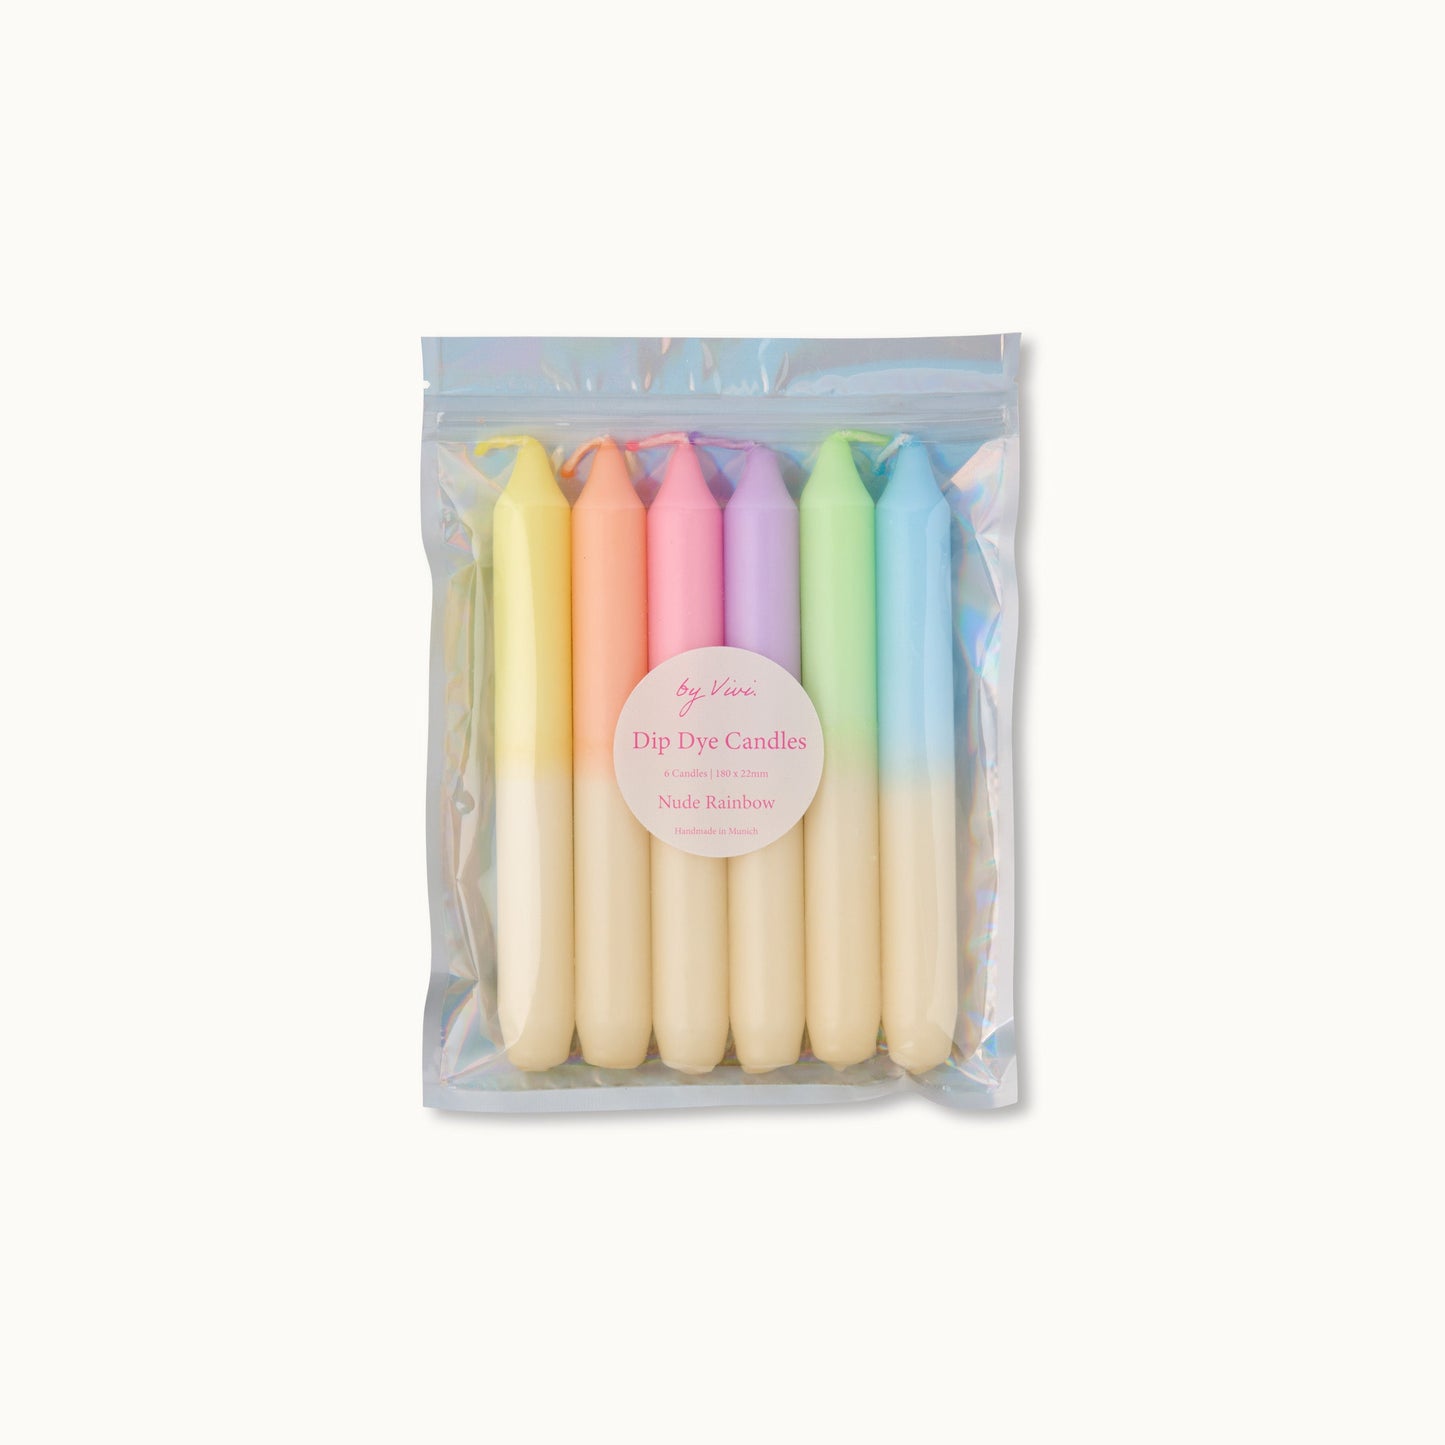 Dip Dye Candle Set of 6: Nude Rainbow Edition